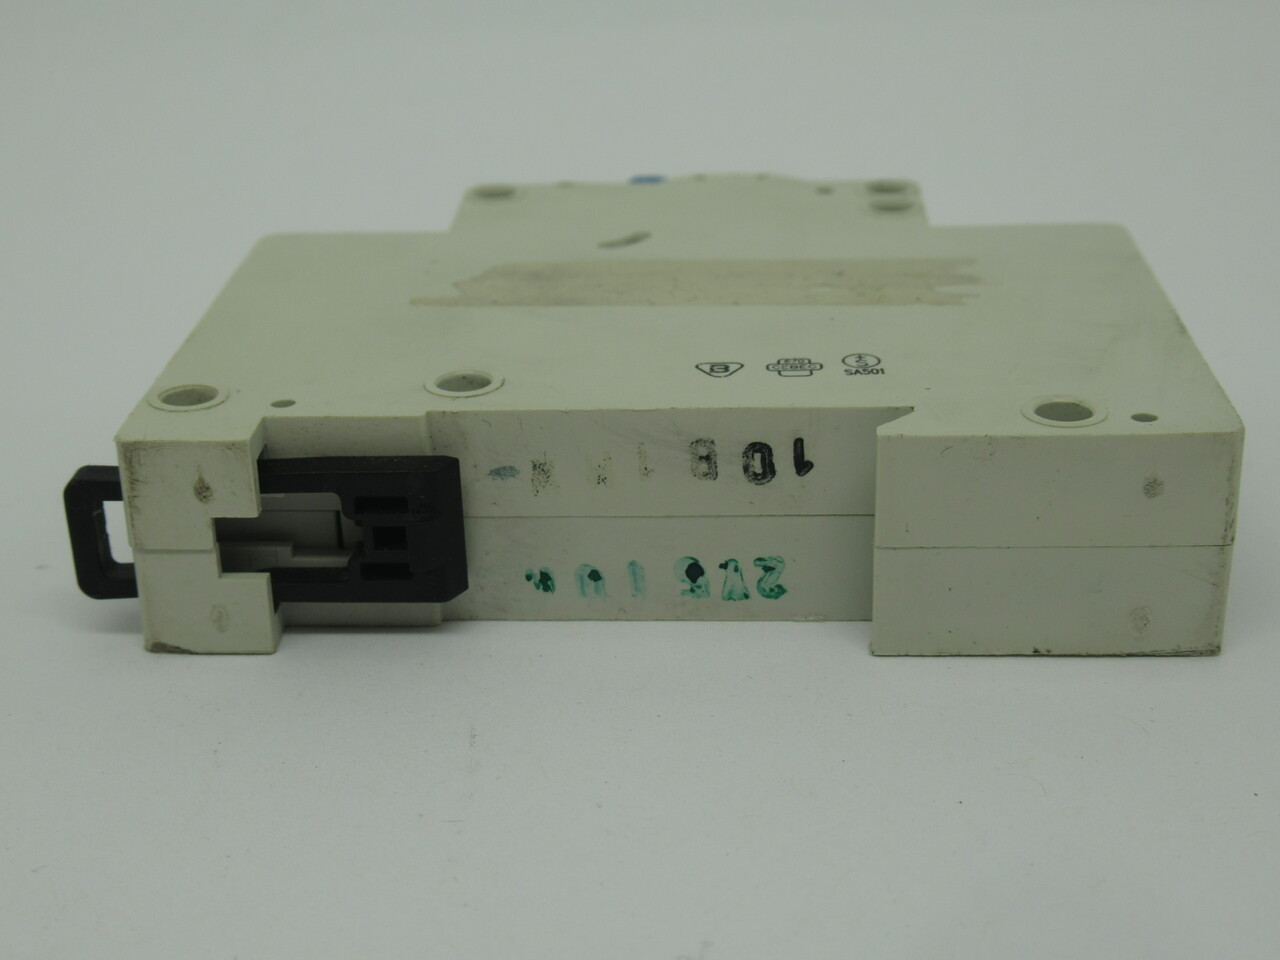 Schrack BS-018110 Circuit Breaker 10A 1-Pole USED